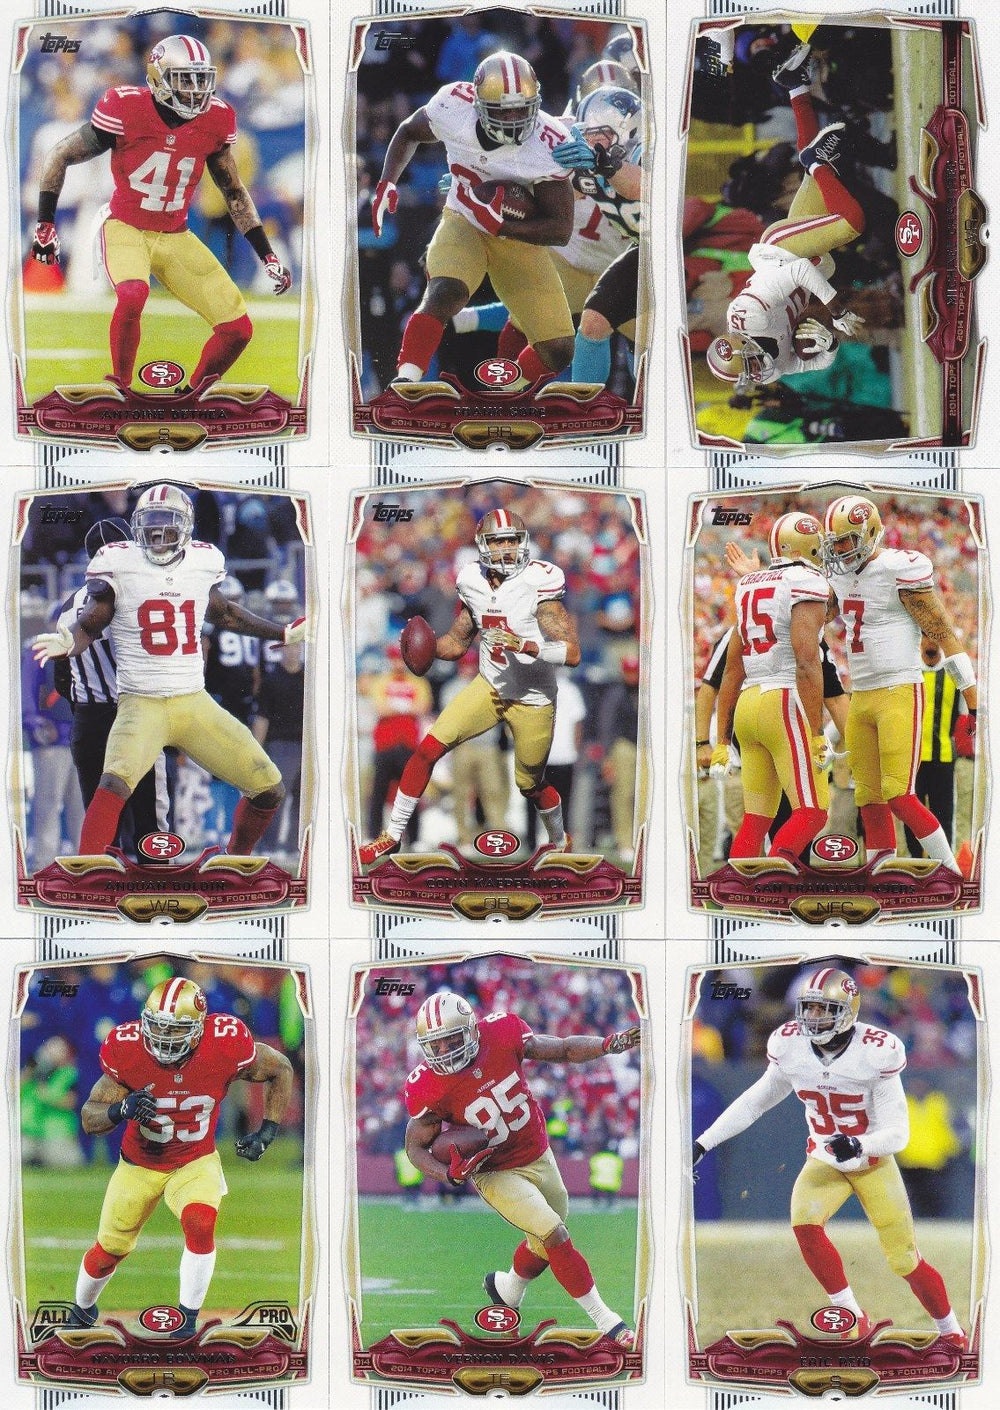 San Francisco 49ers 2014 Topps 13 Card Team Set with Colin Kaepernick and Frank Gore Plus